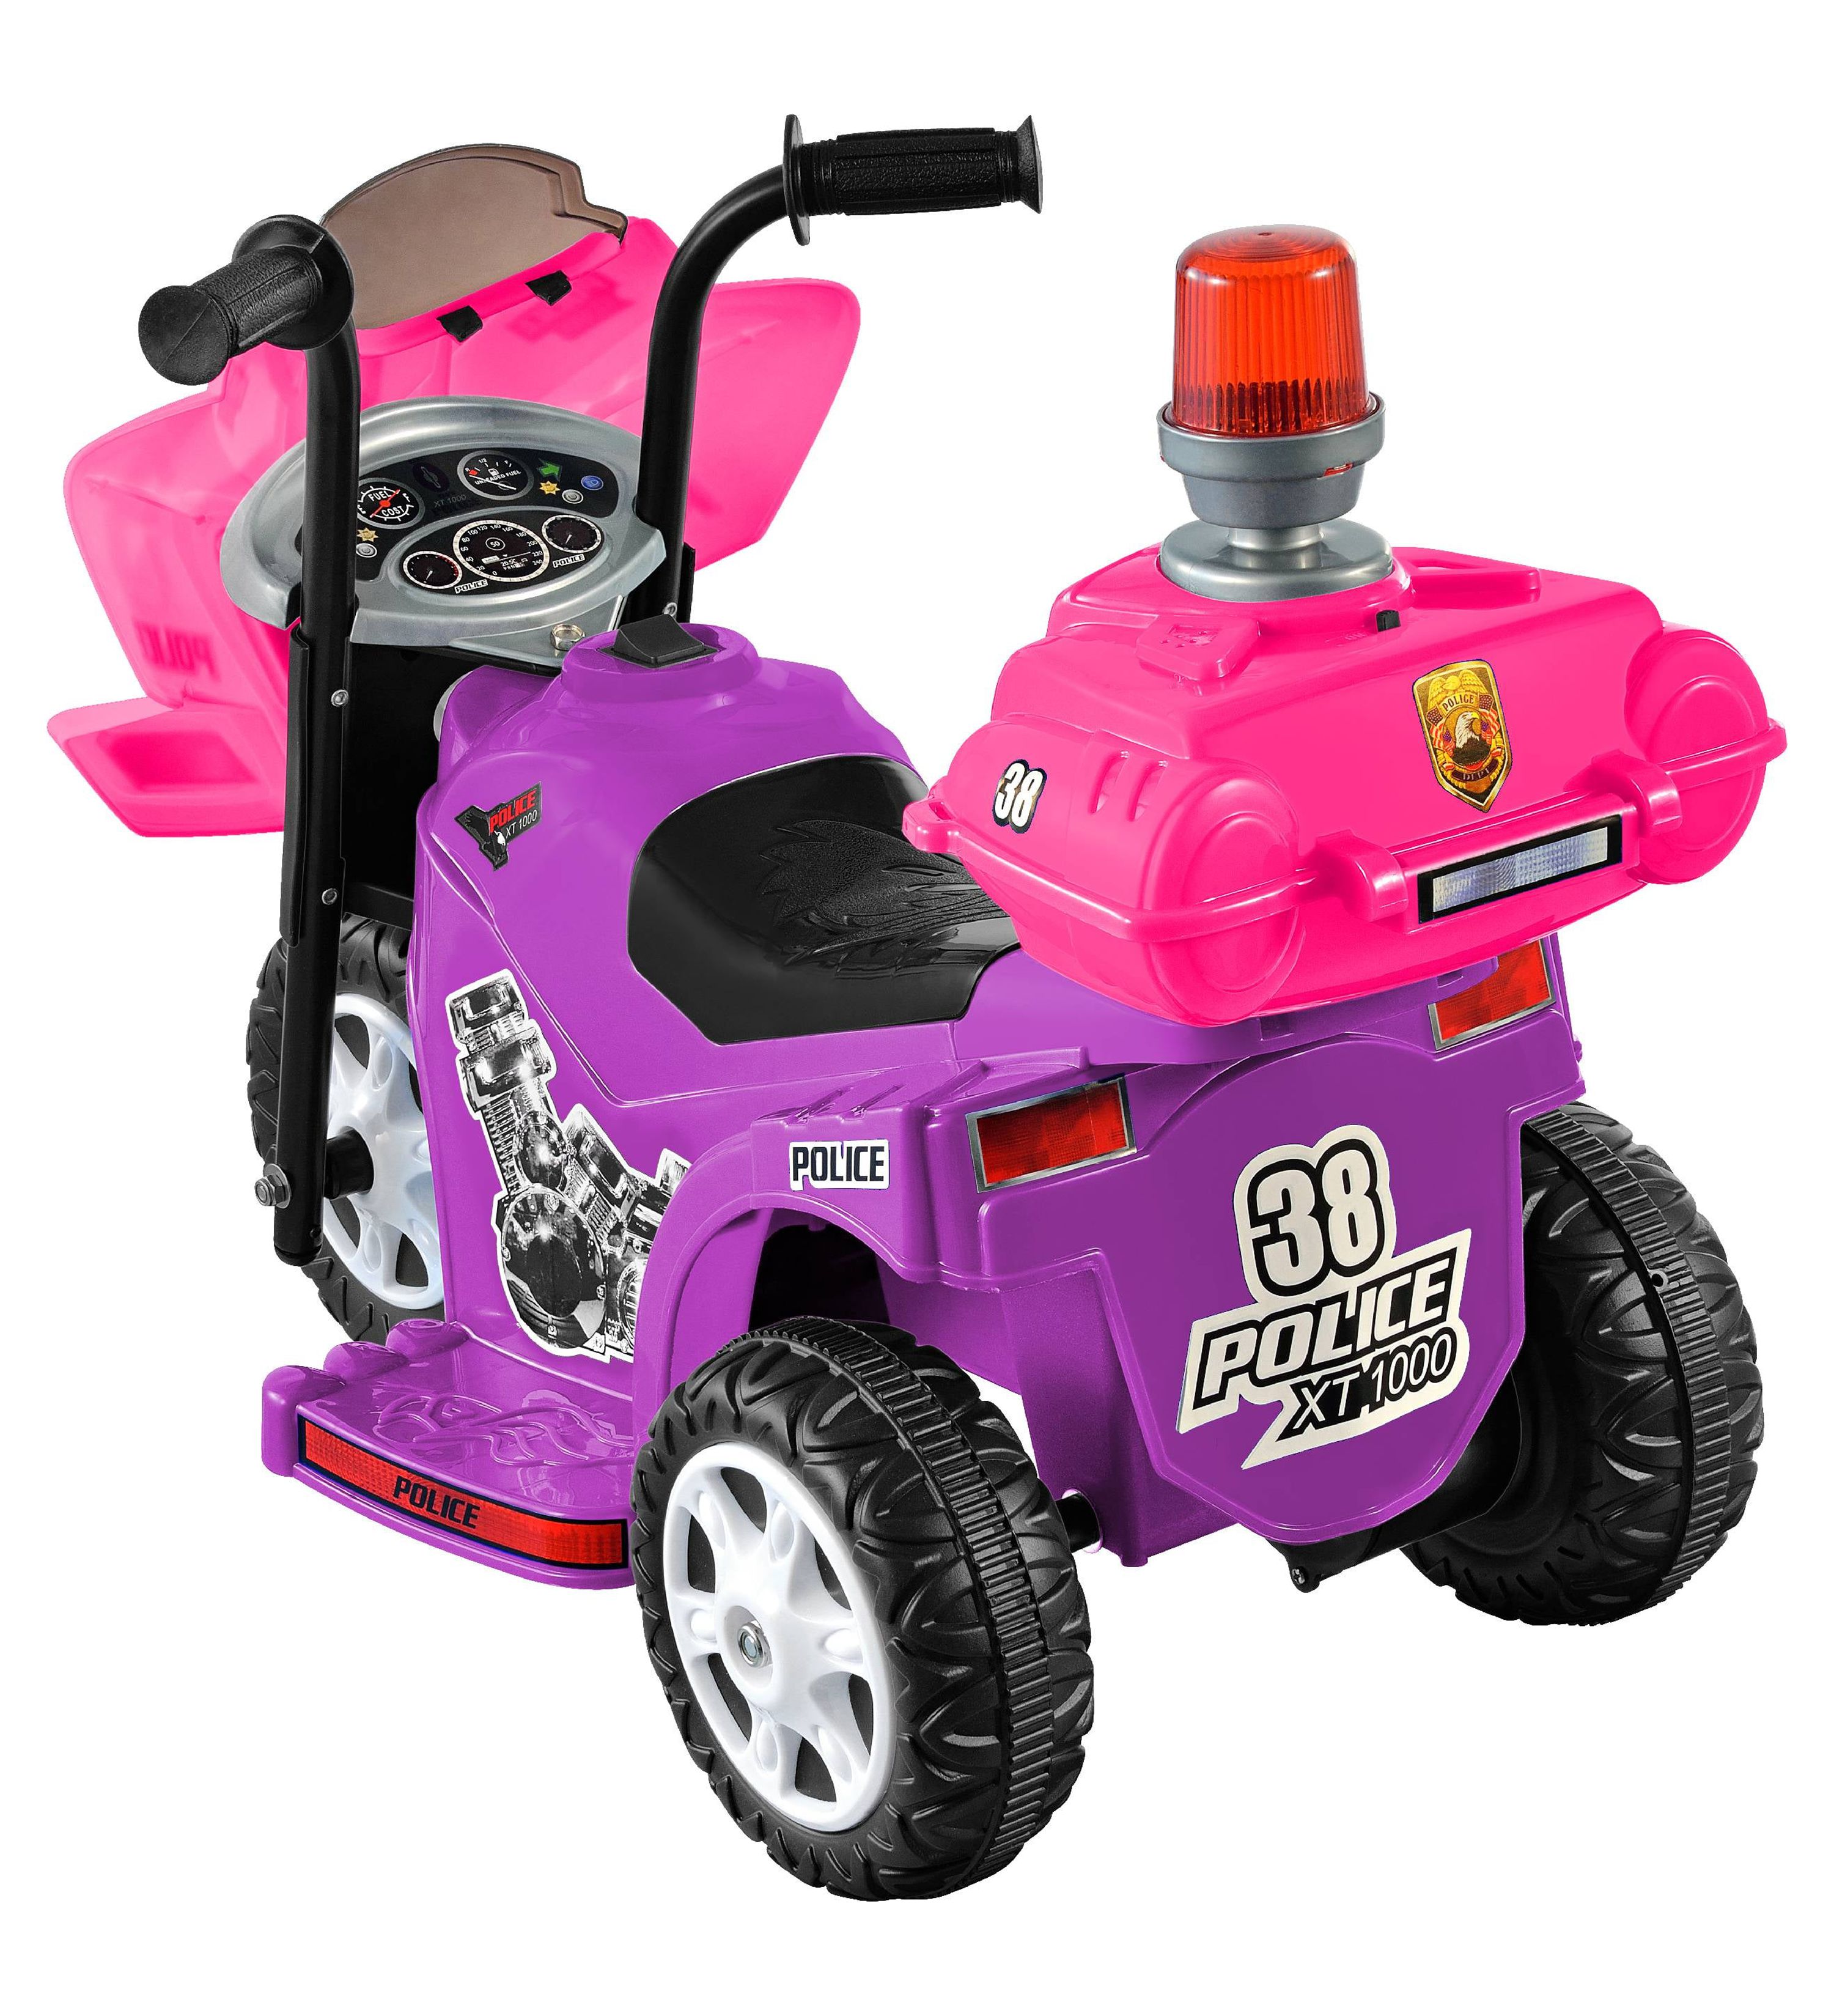 Kid Motorz 6 V Lil' Patrol Purple Battery Powered Ride-On Toy - image 3 of 4